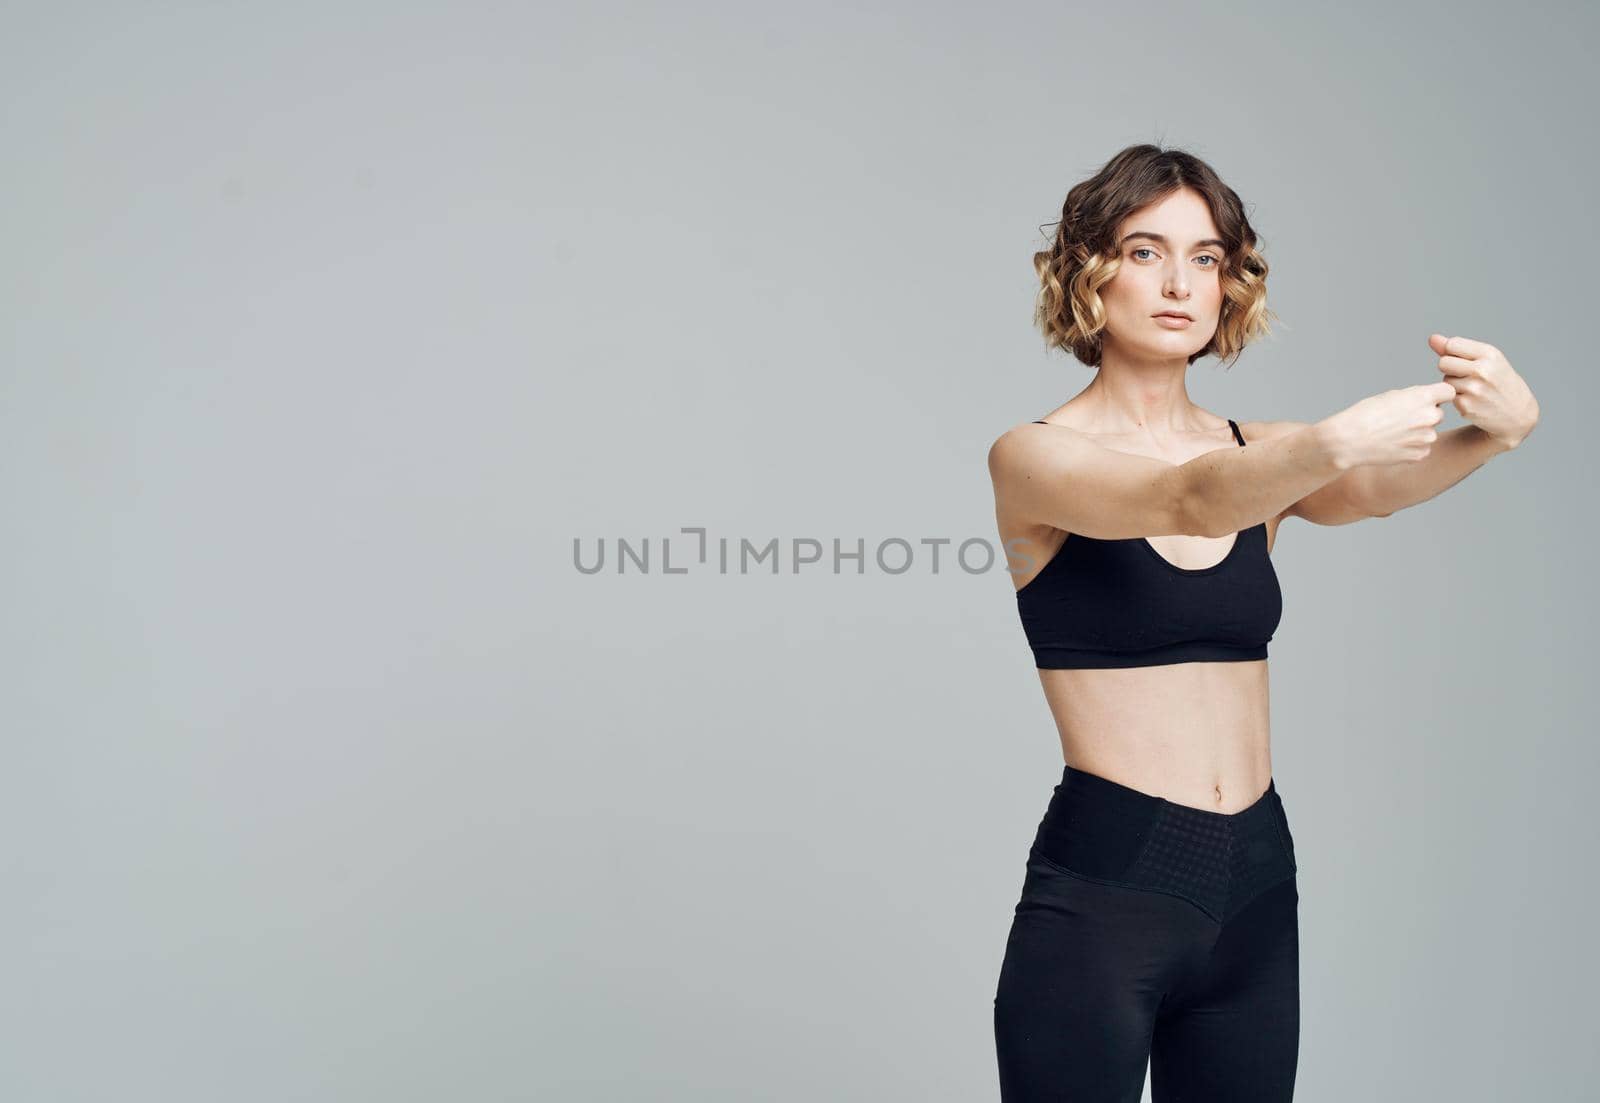 A woman in dark sportswear on a gray background gestures with her hands by SHOTPRIME